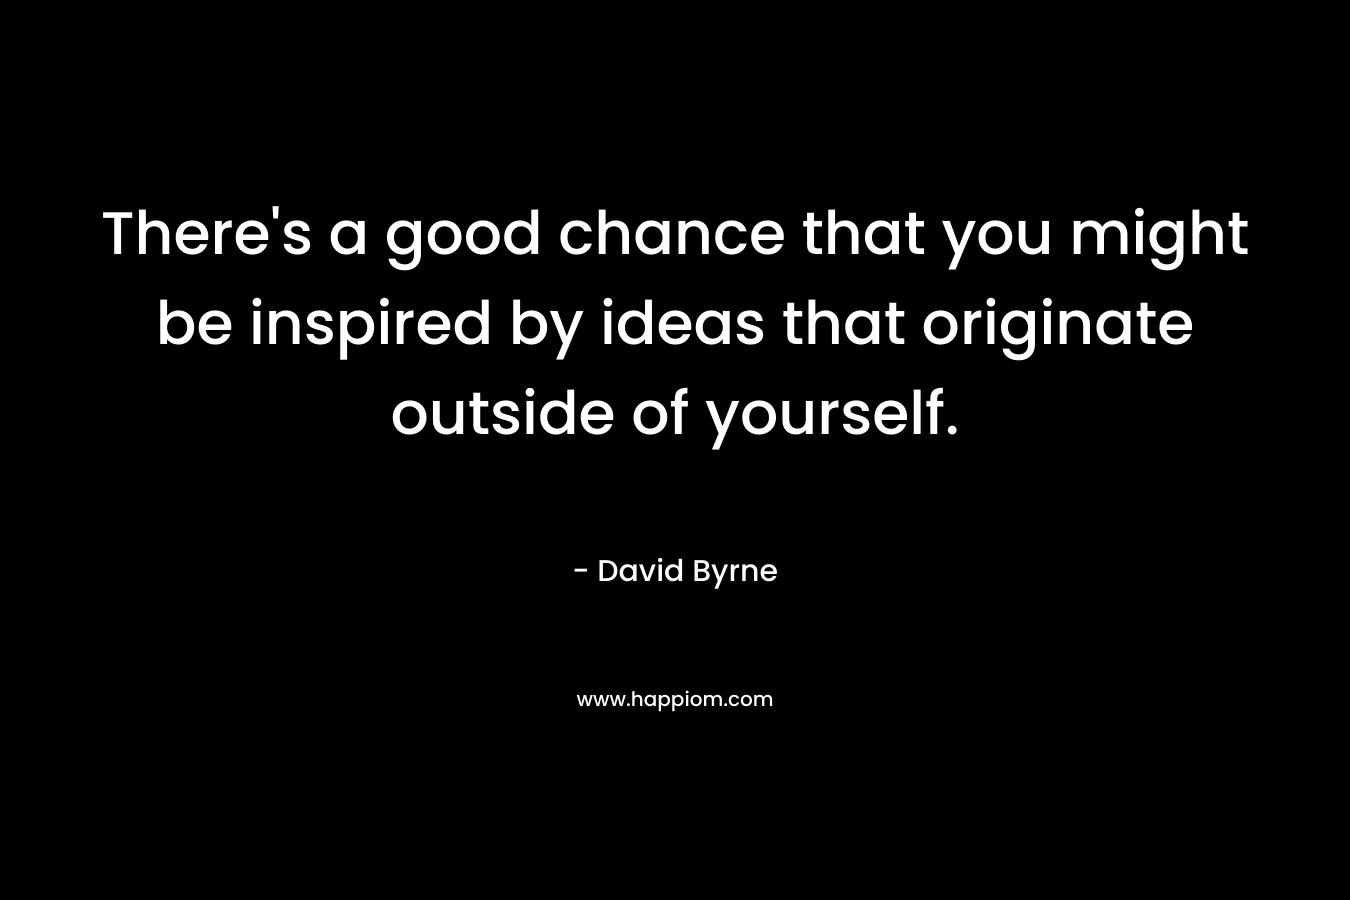 There’s a good chance that you might be inspired by ideas that originate outside of yourself. – David Byrne